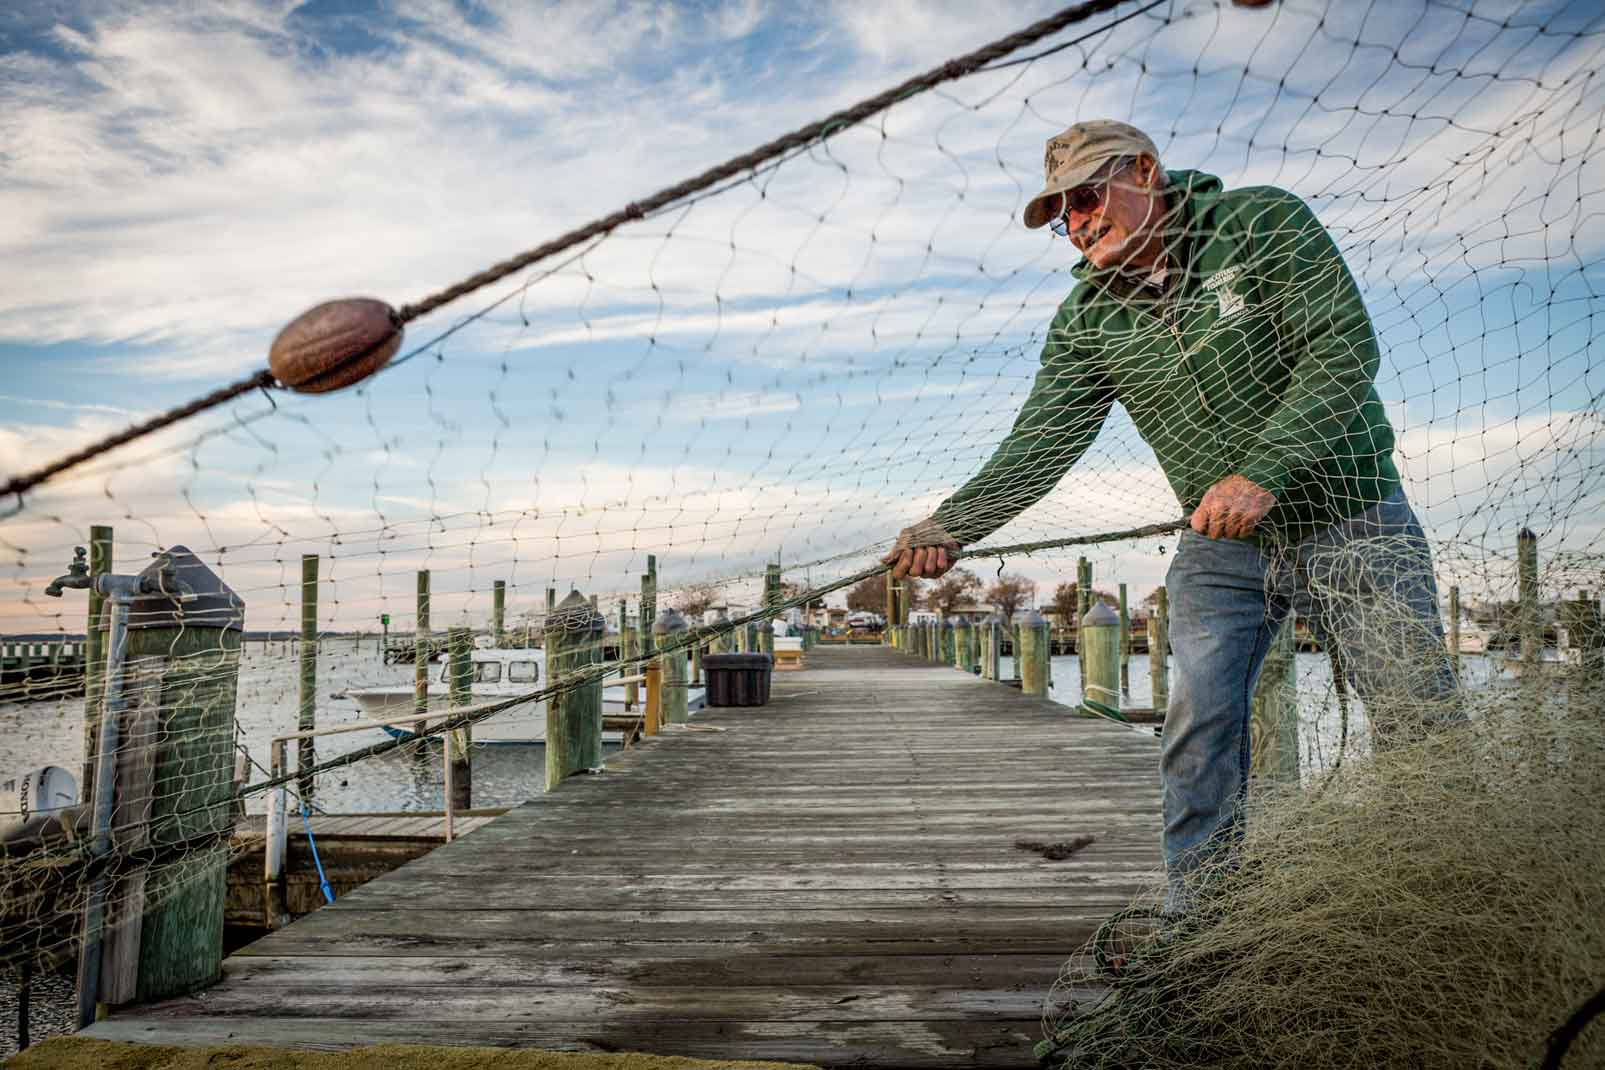 A fisherman pulls in his net and stacks it for storage at the end of the season in Chincoteague, Virginia. The mid-Atlantic region’s commercial fisheries support nearly 100,000 jobs. Photo © Jason Houston